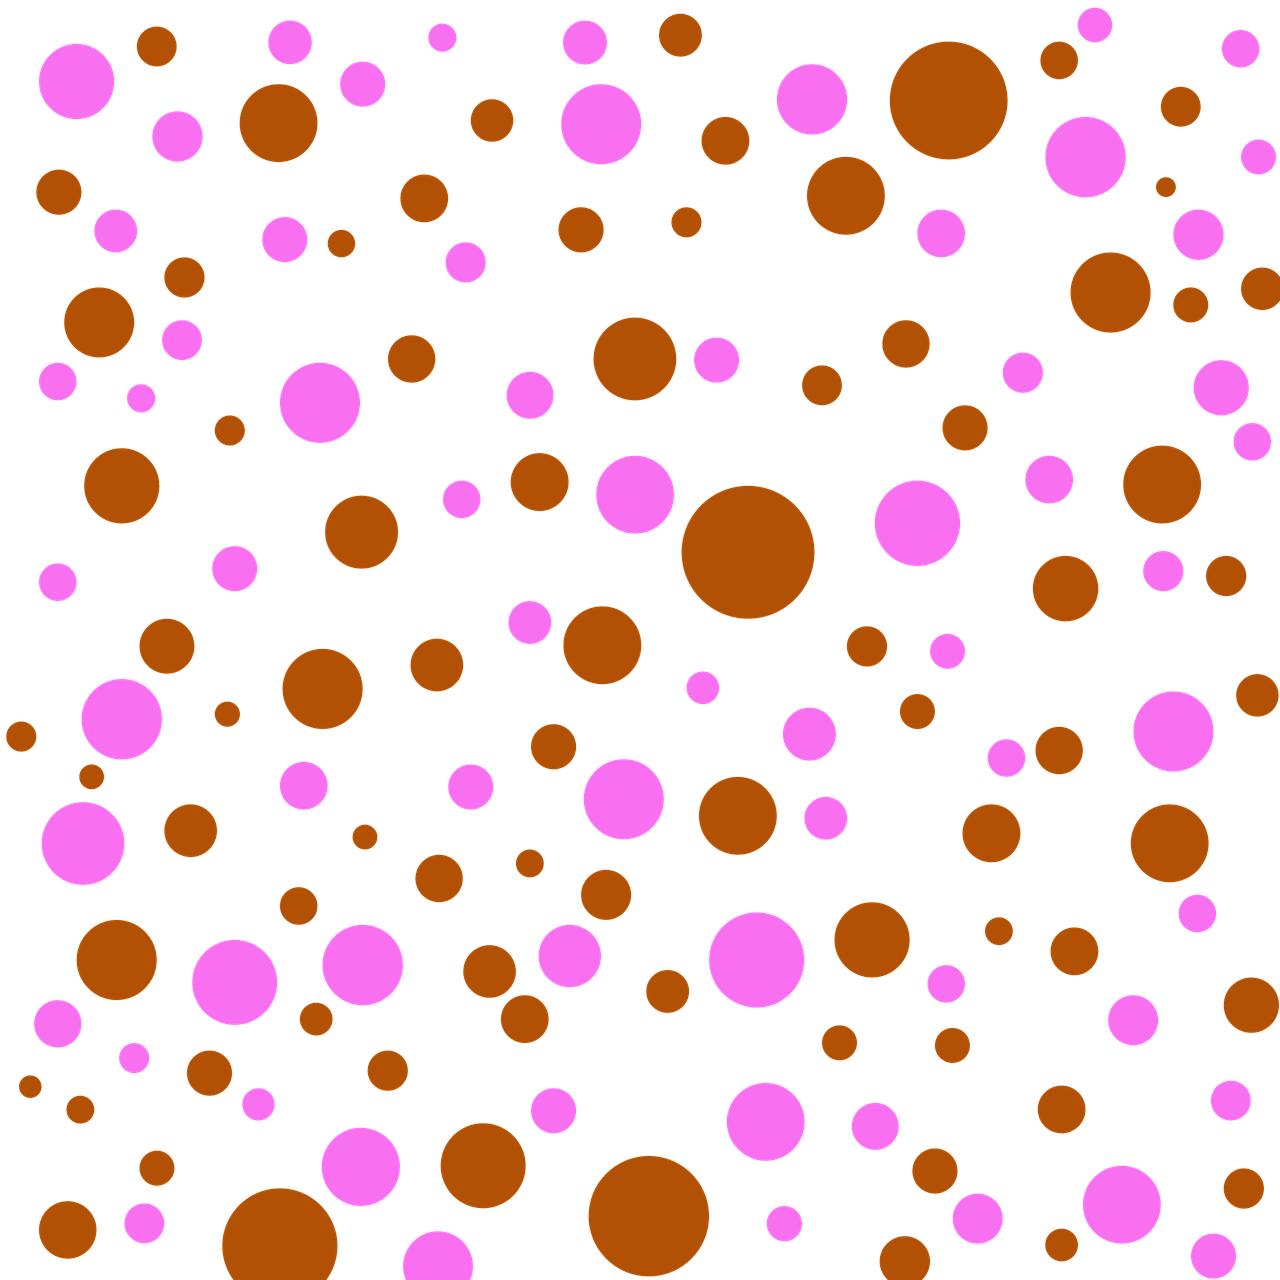 A Pattern Of Pink And Orange Circles